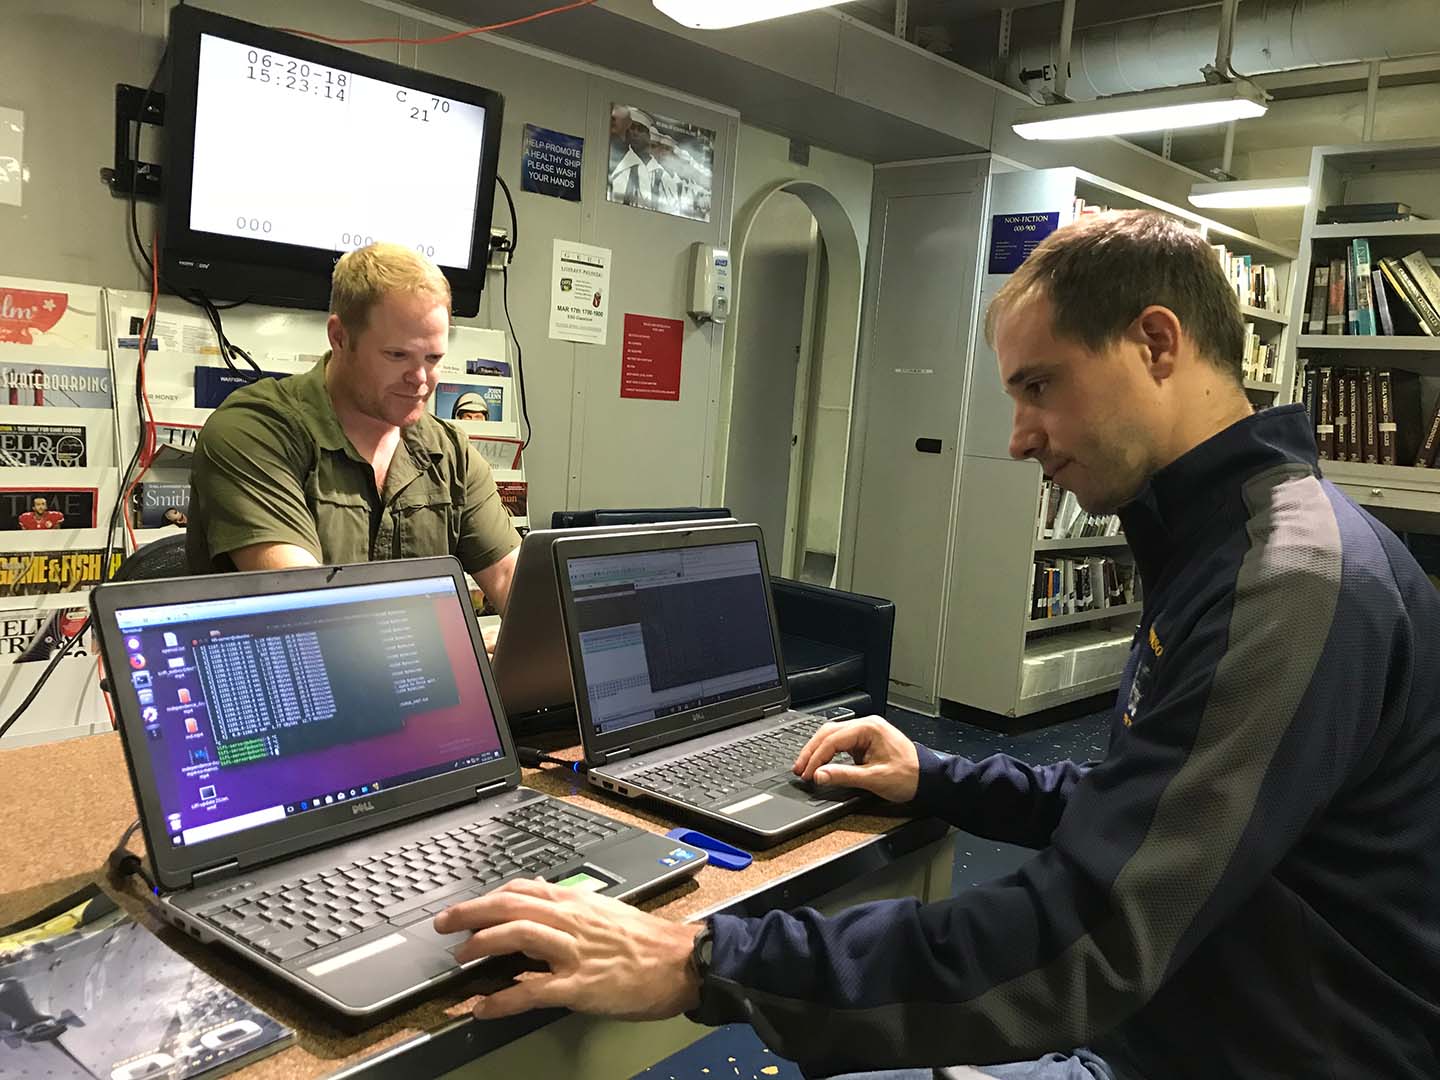 From left: Ryan Mennecke and Edward Holzinger aboard the USS Carl Vinson during Trident Warrior 2018